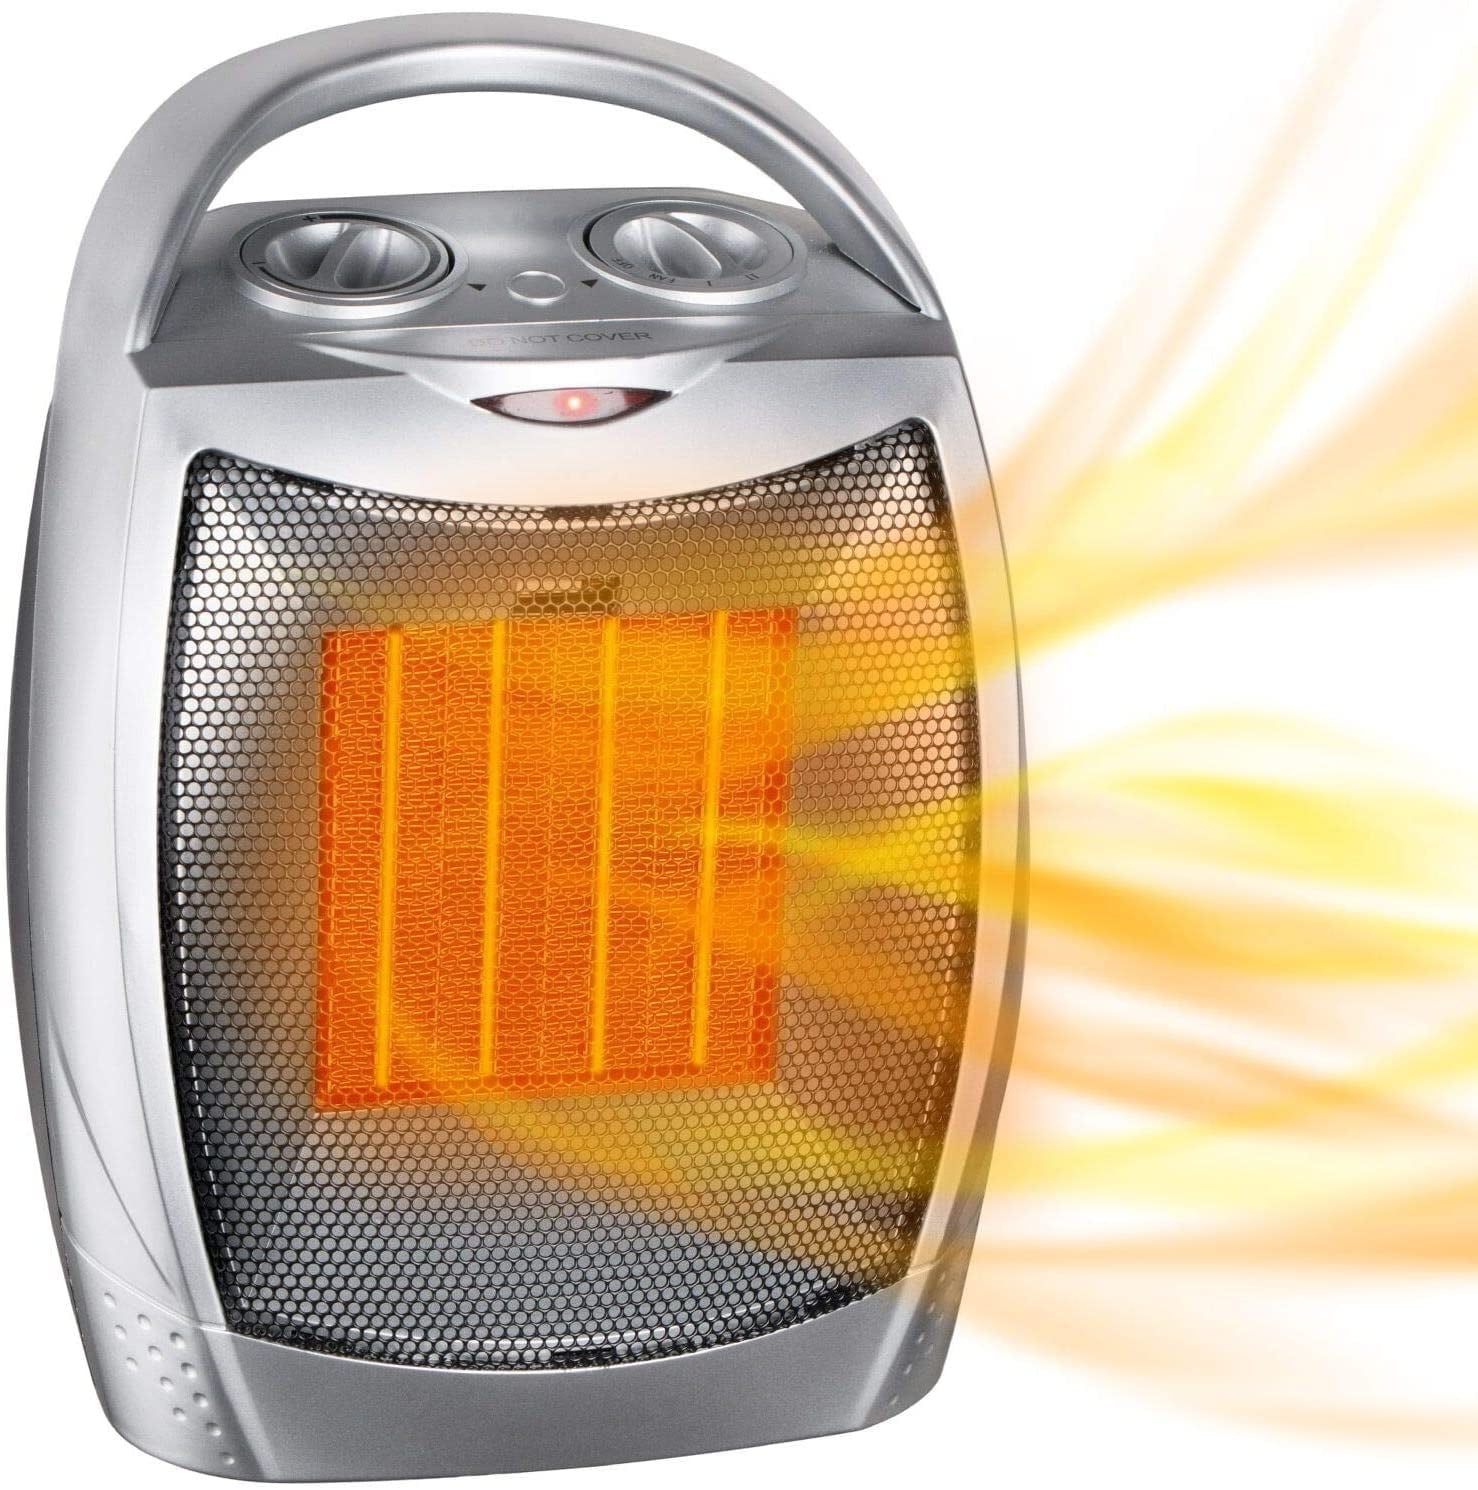 Brightown Small Space Heater for Indoor Use - 400W  